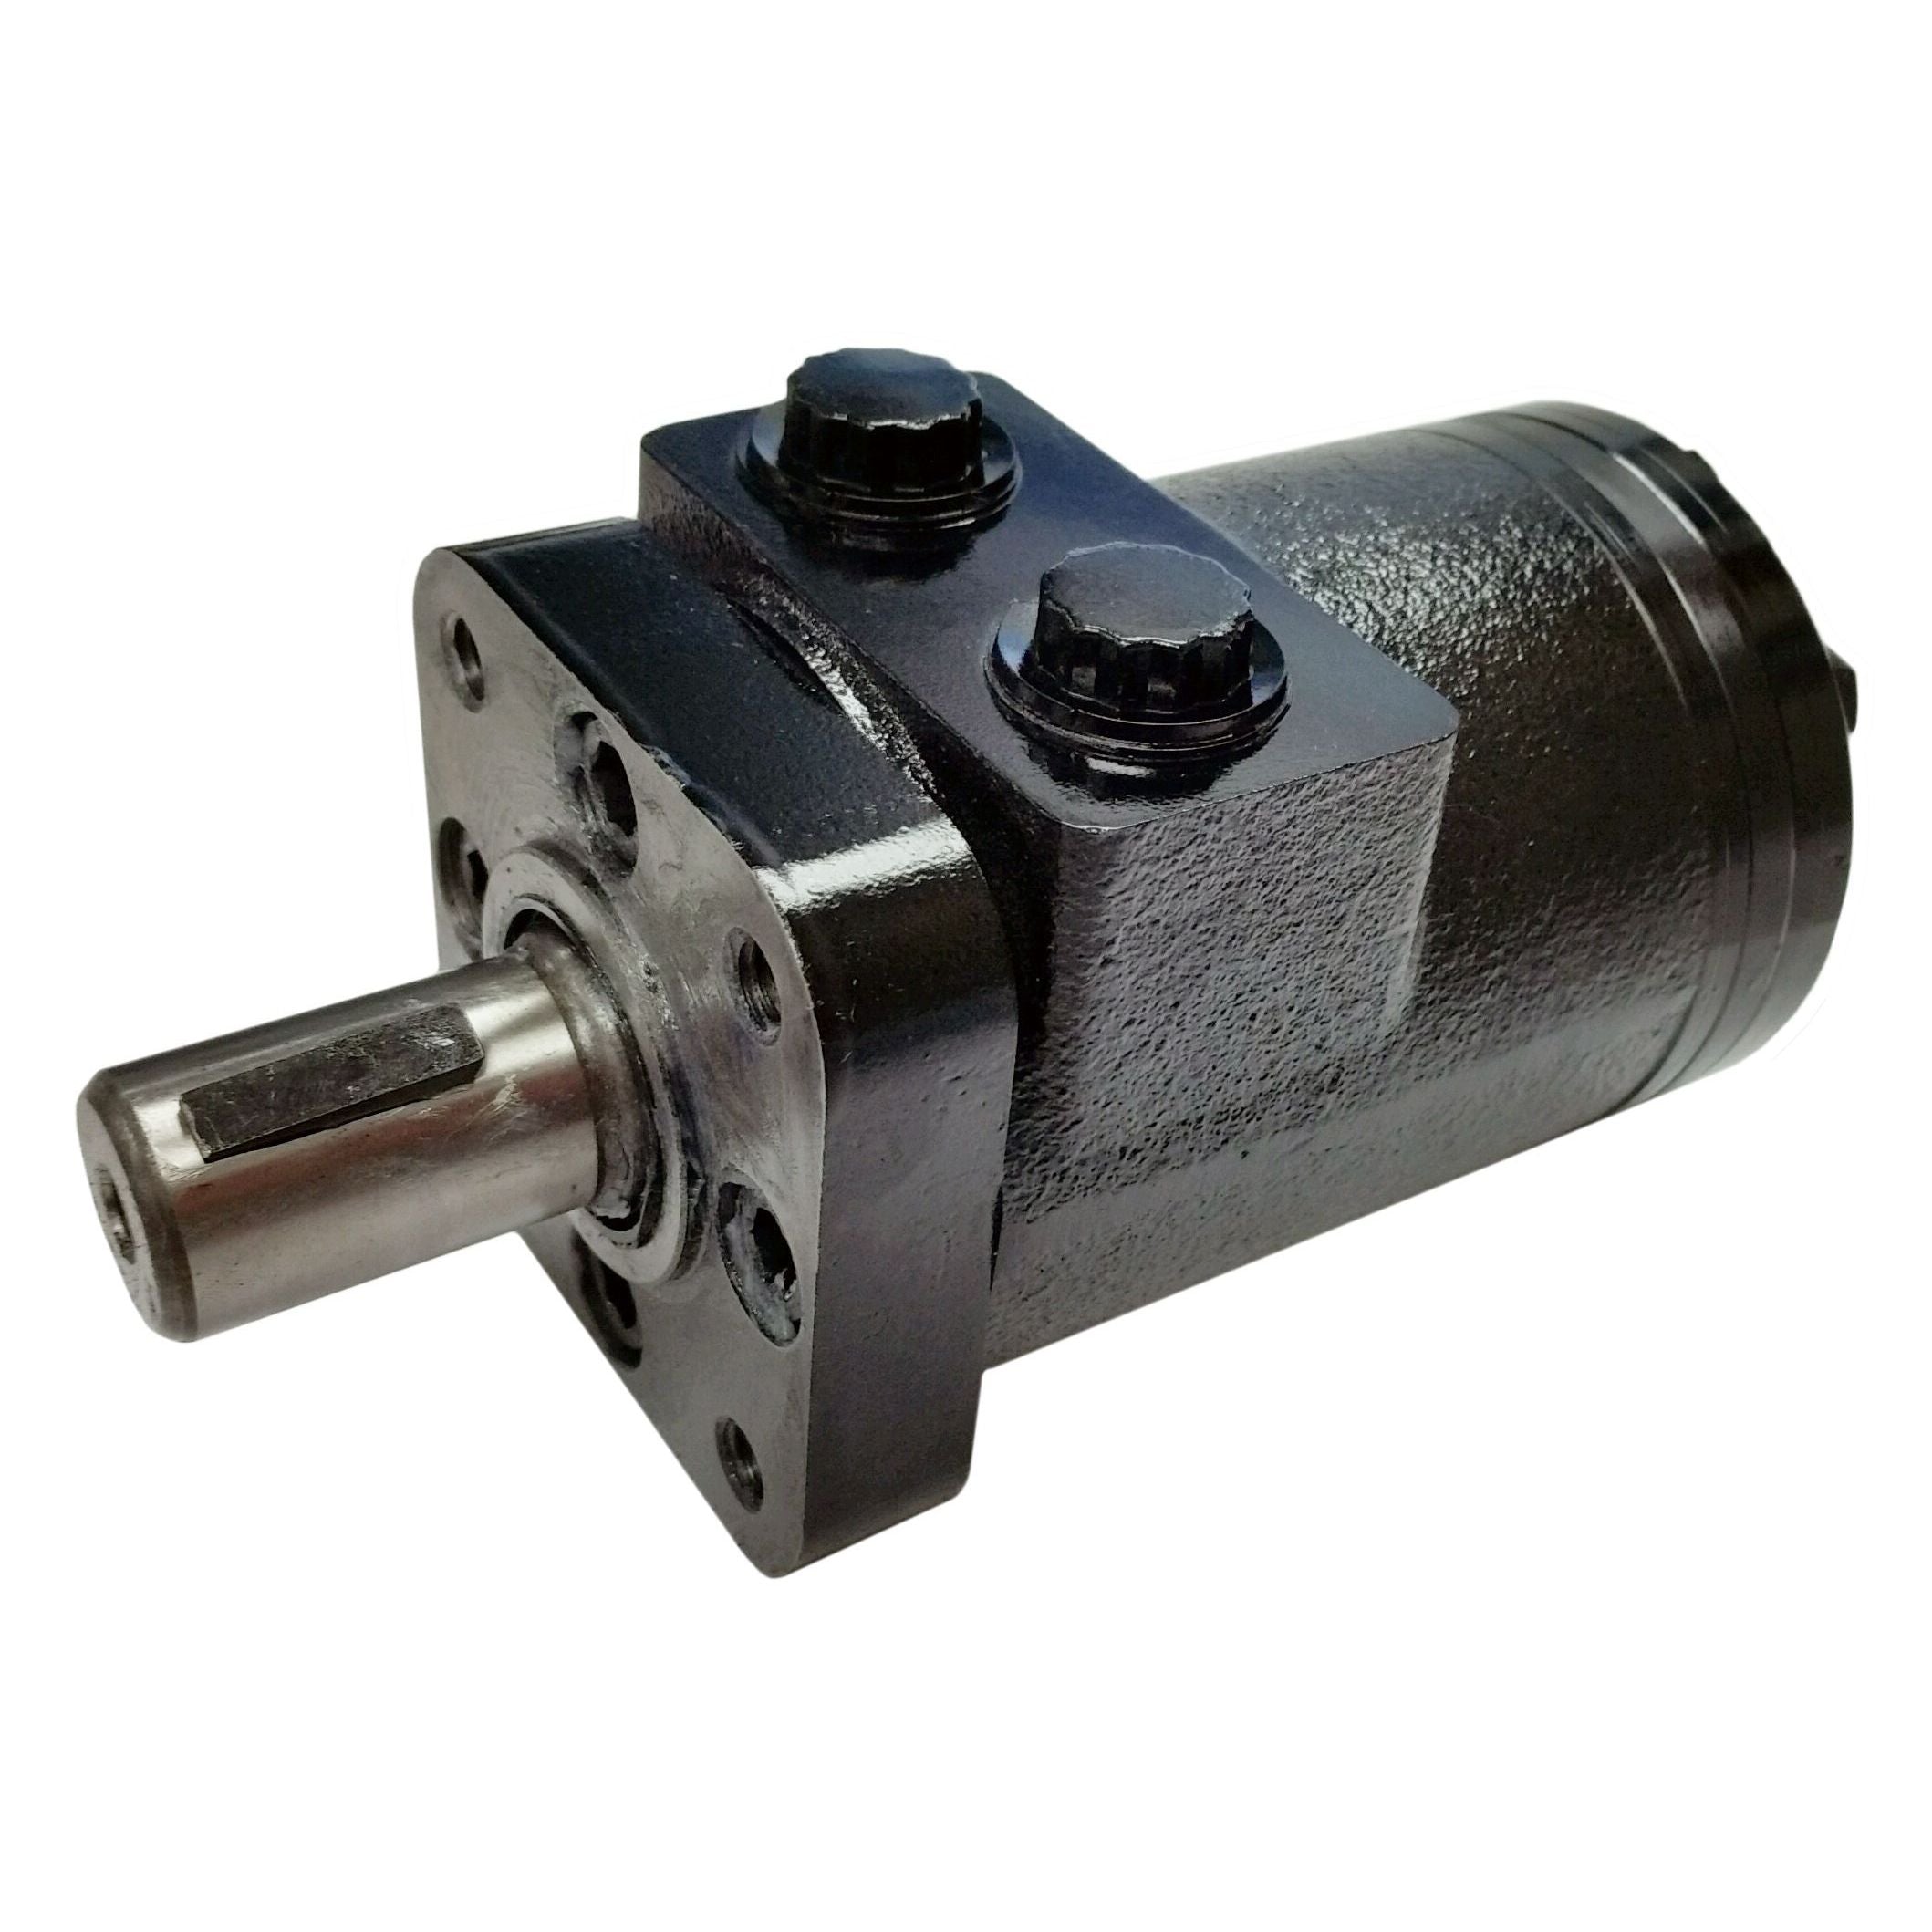 BMPH-250-H4-K-S : Dynamic LSHT Motor, 240cc, 250RPM, 3363in-lb, 2031psi Differential, 15.85GPM, SAE A 4-Bolt Mount, 1" Bore x 1/4" Key Shaft, Side Ported, #10 SAE (5/8")